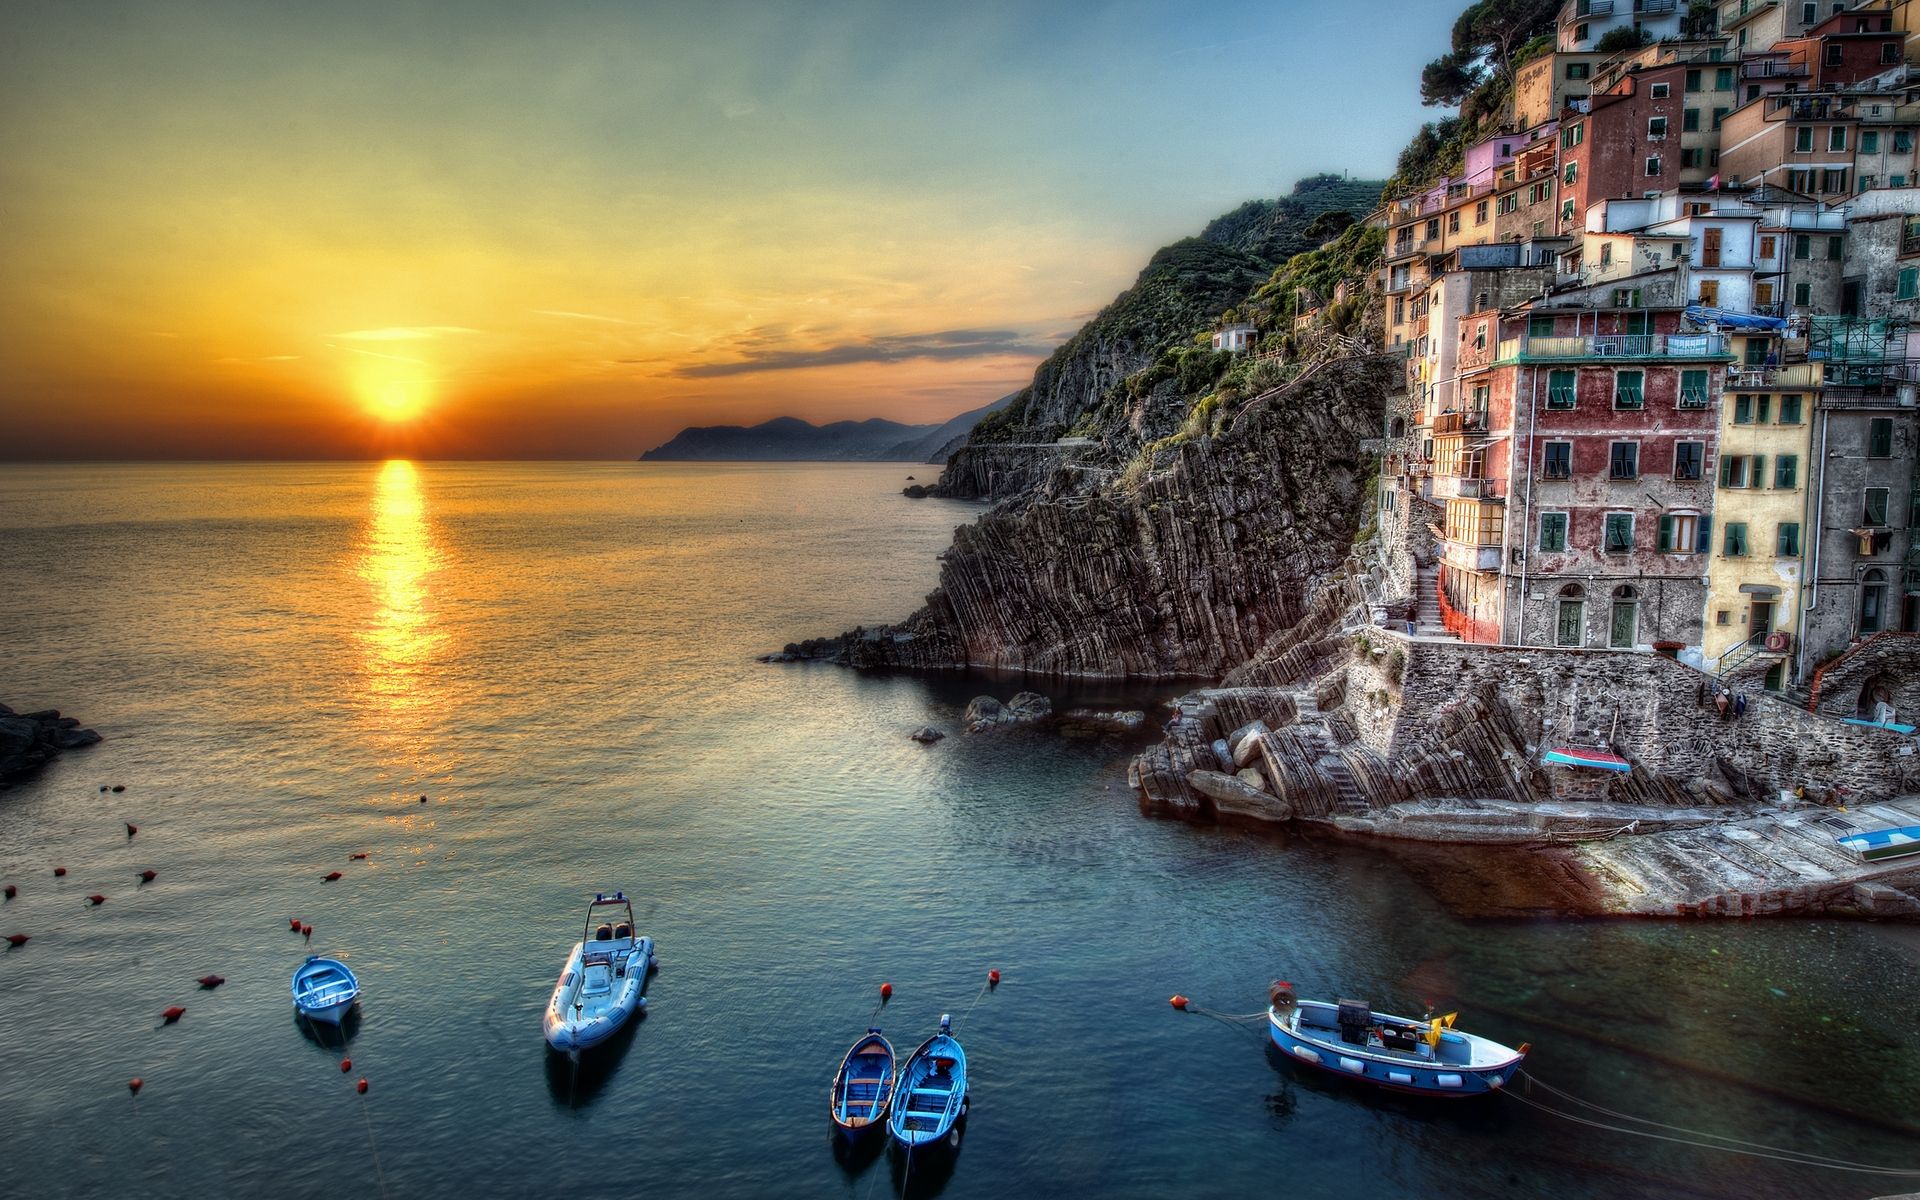 Cinque Terre: the place where time stopped